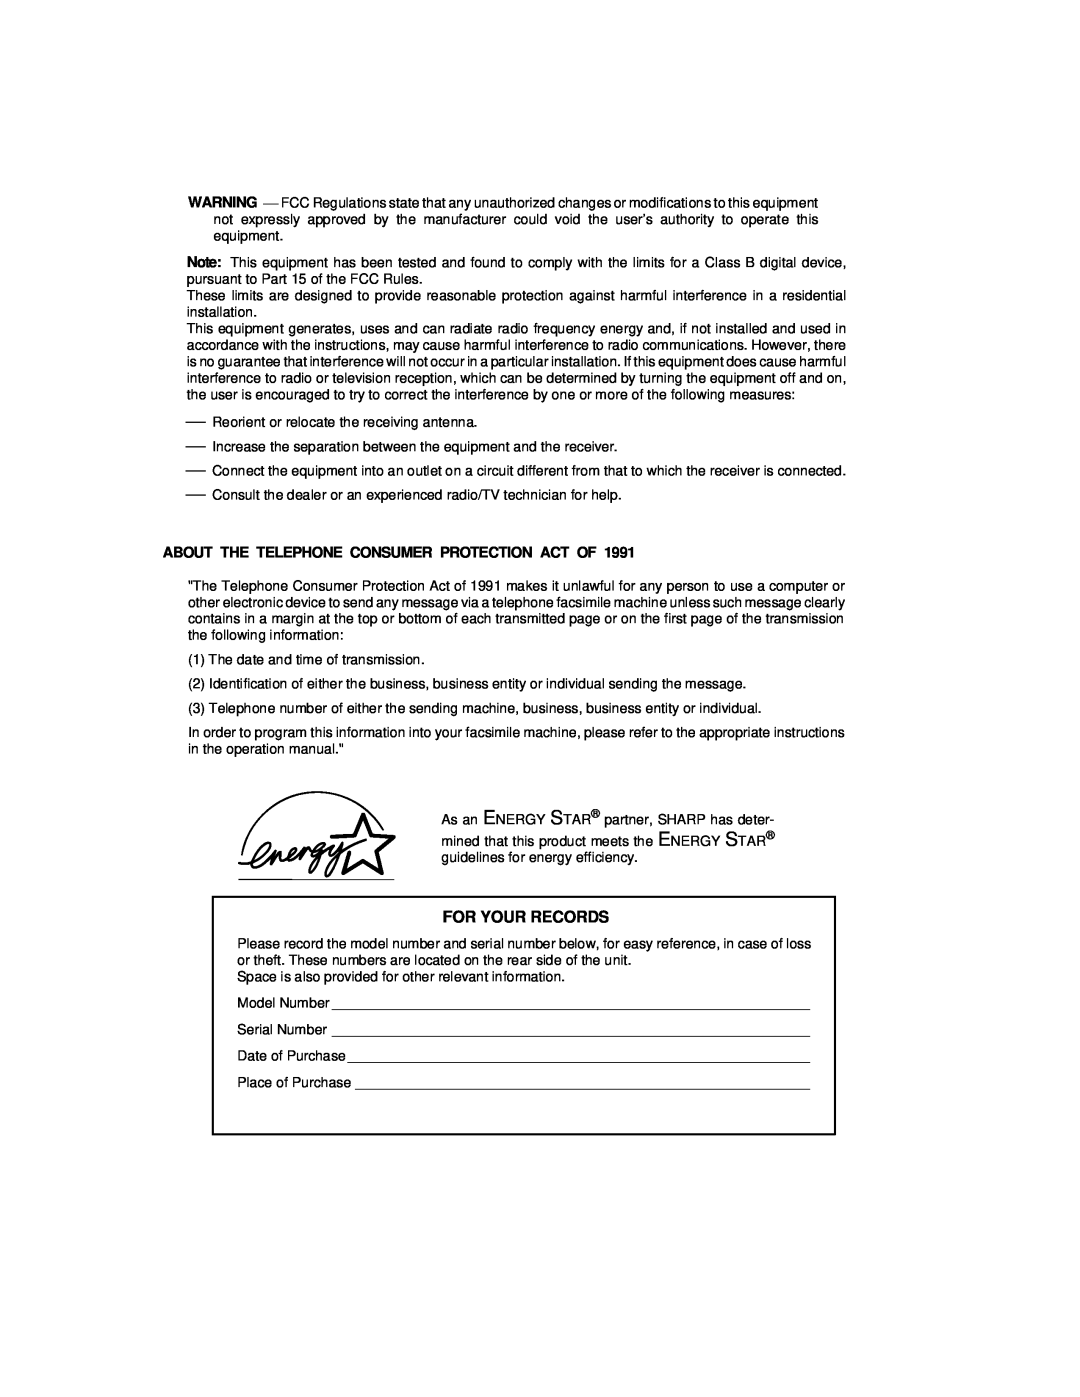 Sharp UX-460 operation manual For Your Records, About The Telephone Consumer Protection Act Of 